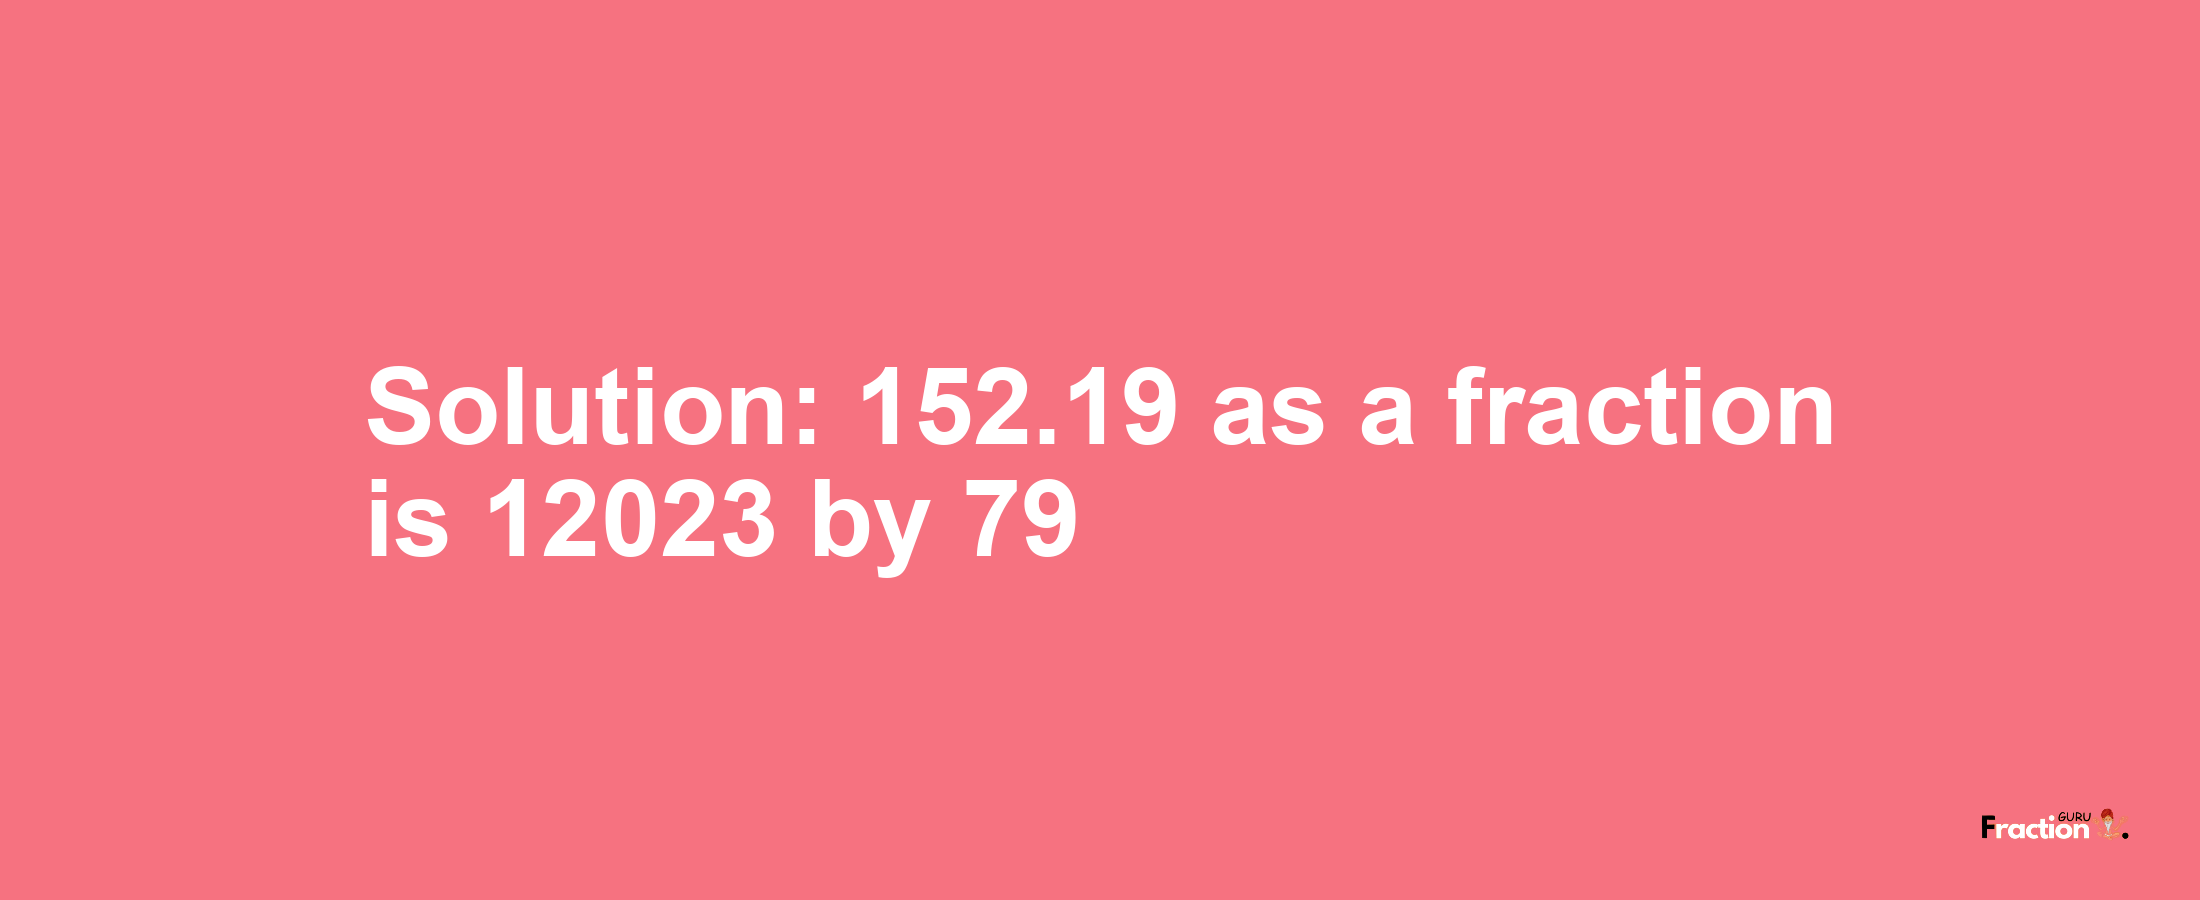 Solution:152.19 as a fraction is 12023/79